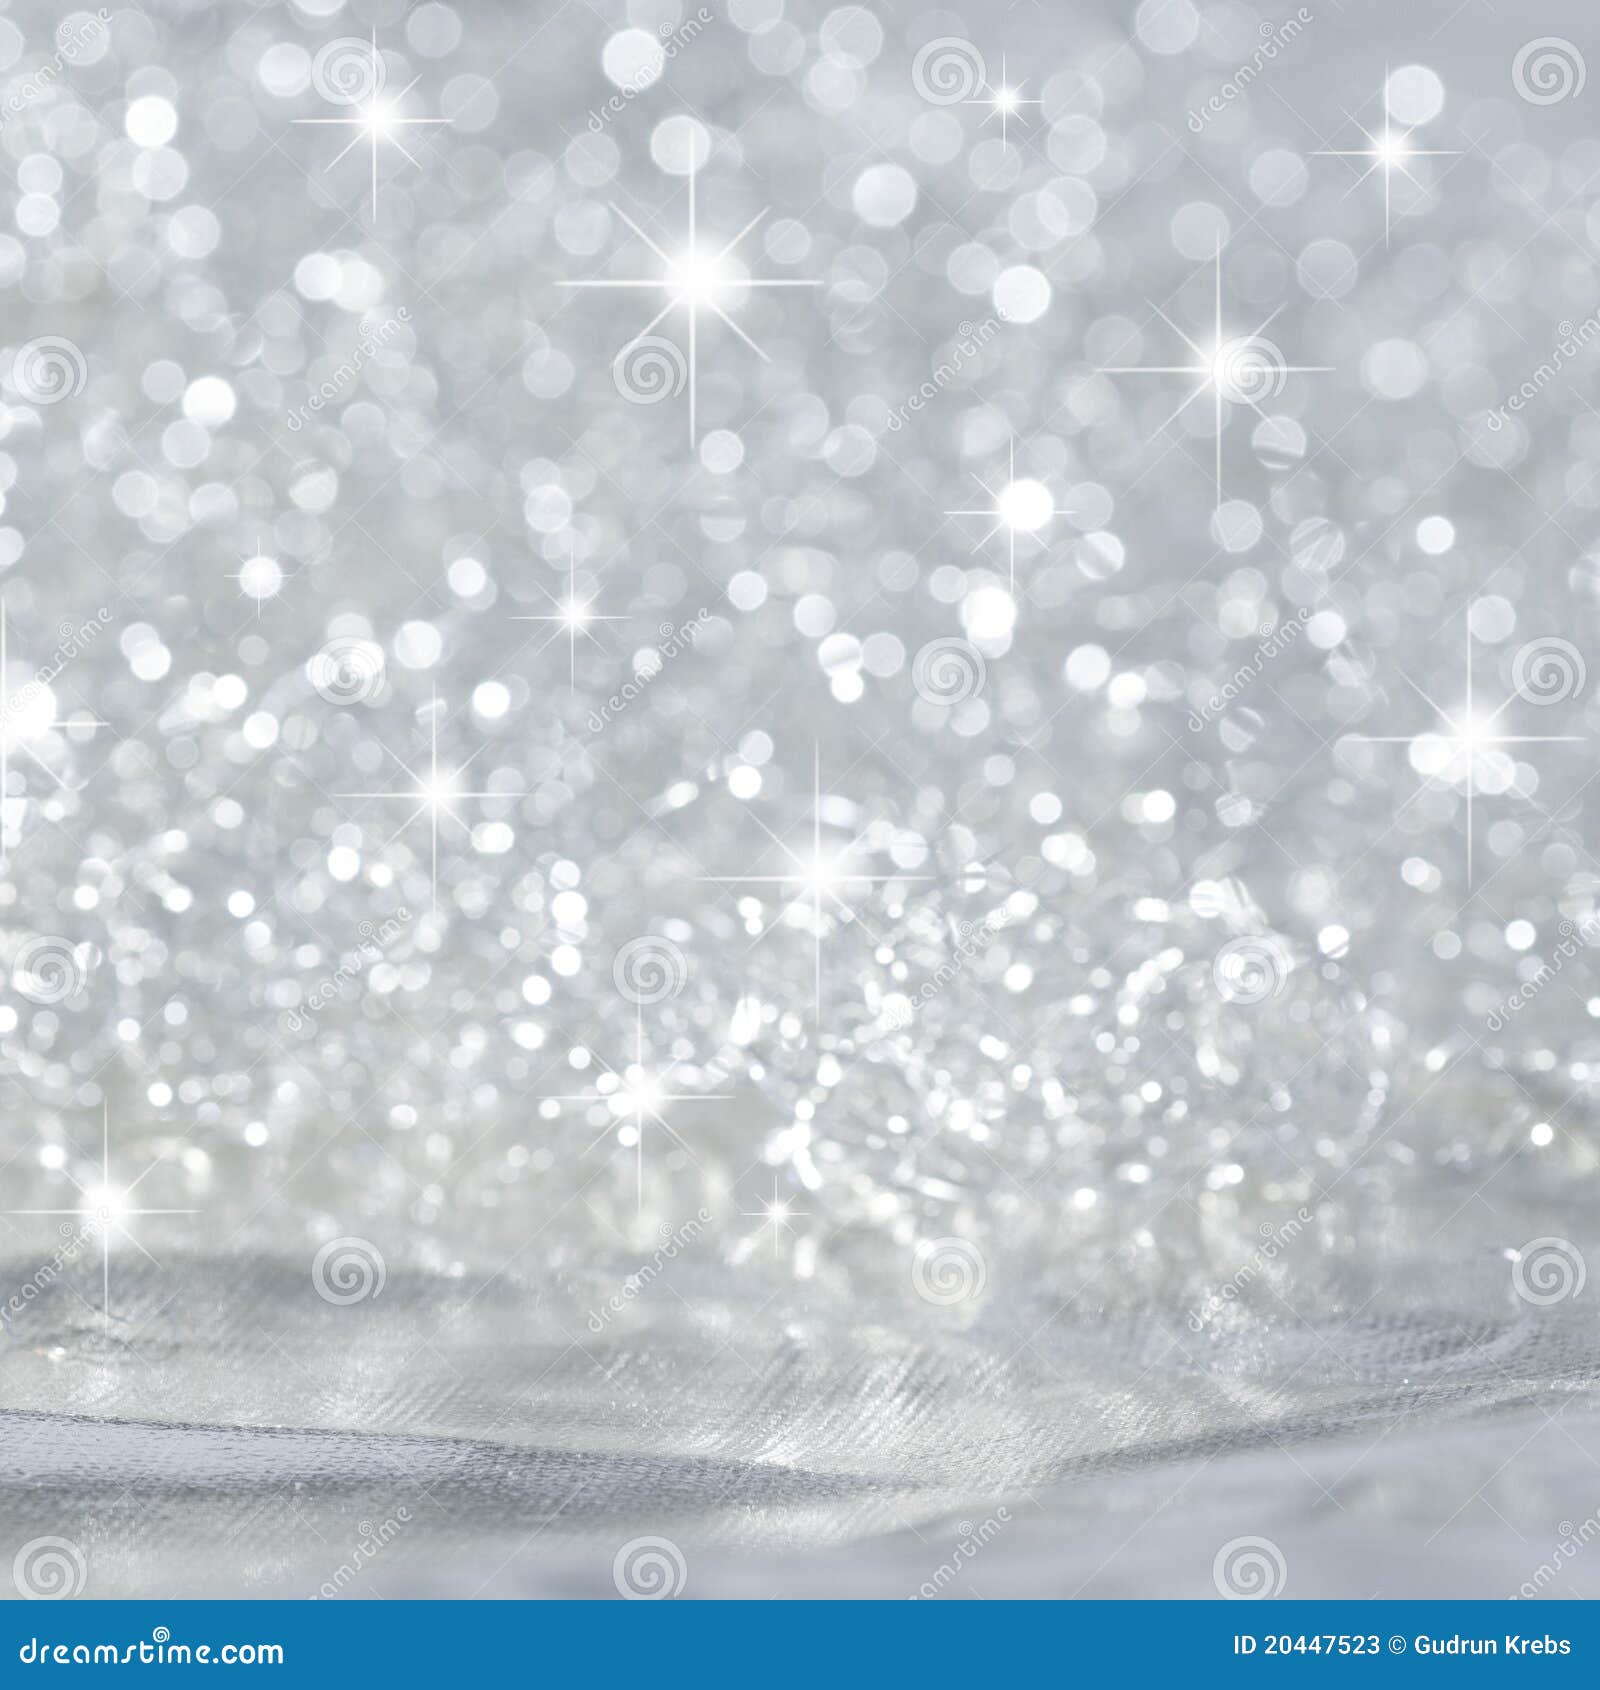 https://thumbs.dreamstime.com/z/christmas-background-silver-20447523.jpg